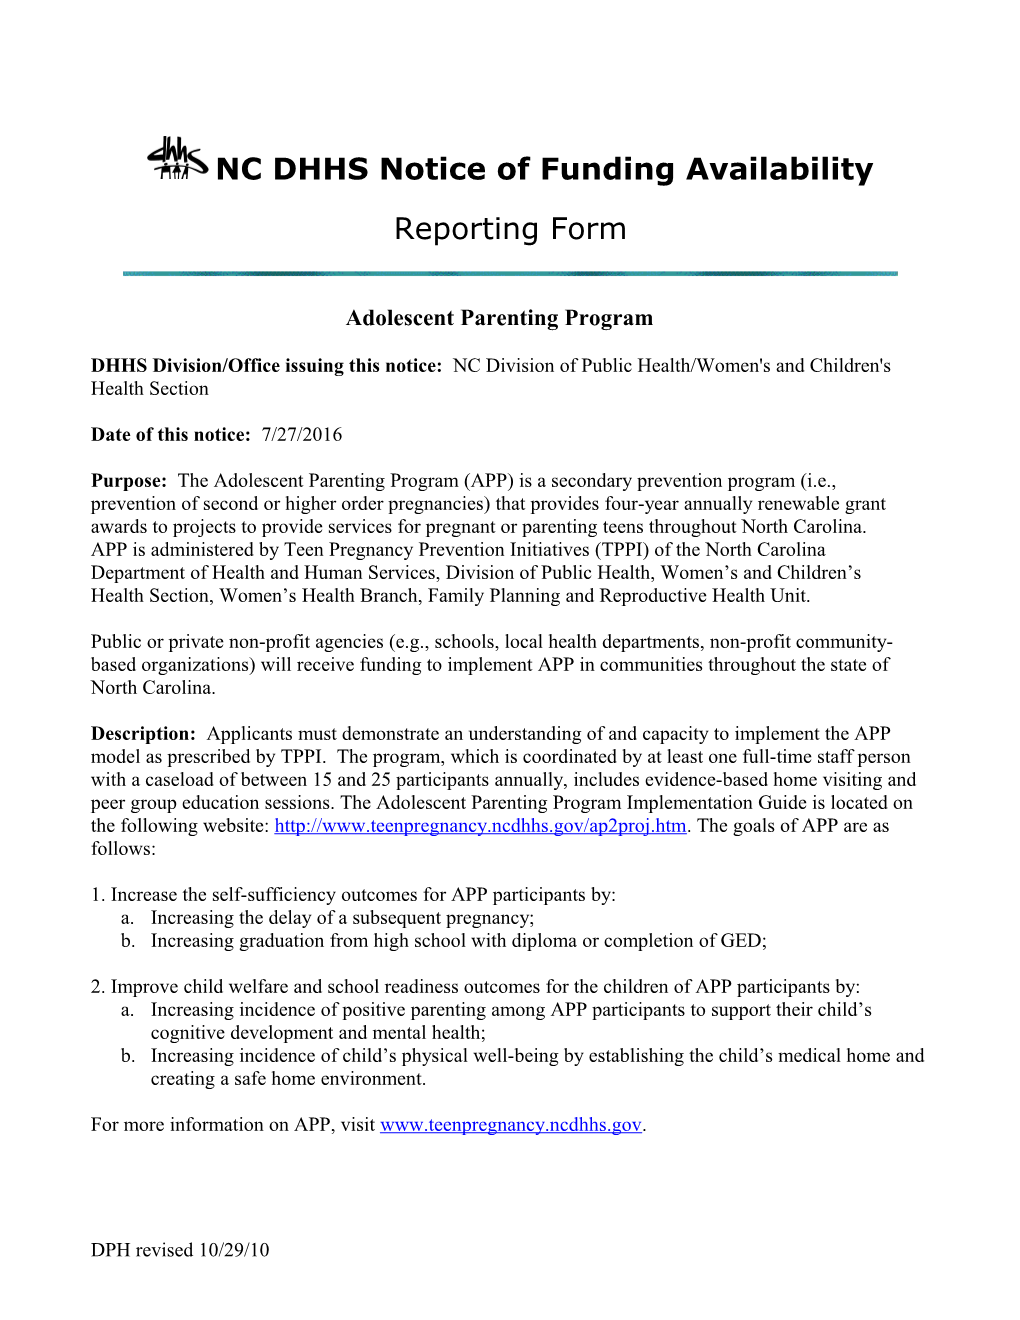 NC DHHS Notice of Funding Availability s1